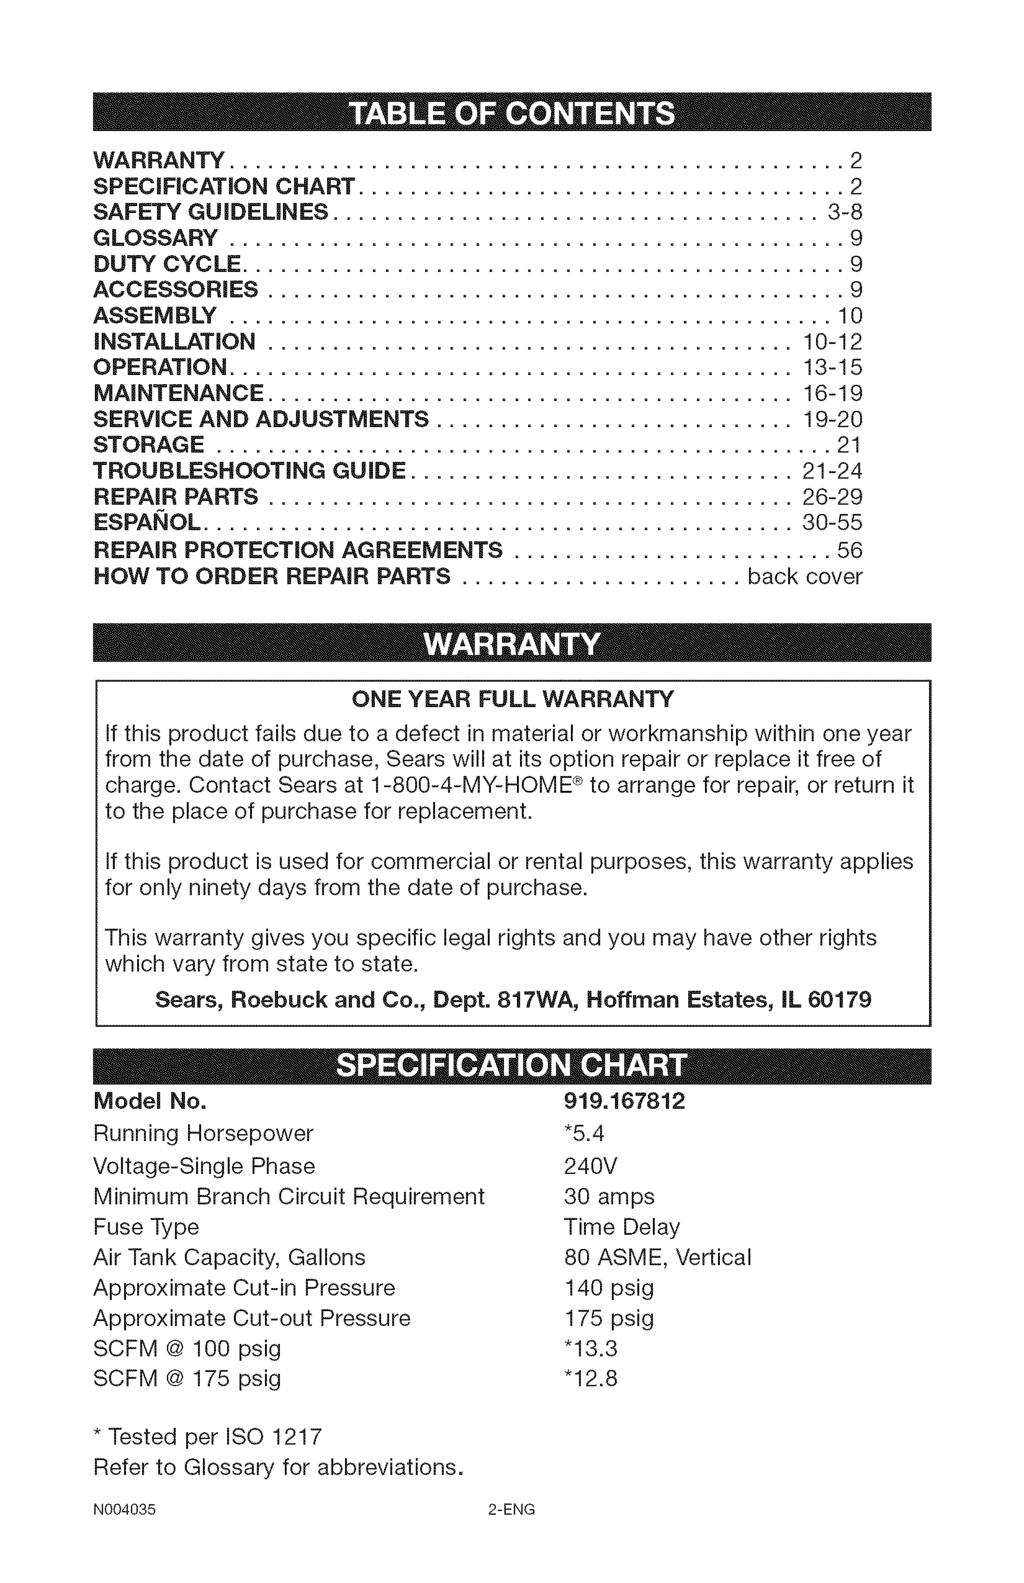 WARRANTY... 2 SPECiFiCATiON CHART... 2 SAFETY GUiDELiNES... 3-8 GLOSSARY... 9 DUTY CYCLE... 9 ACCESSORIES... 9 ASSEMBLY... 10 INSTALLATION... 10-12 OPERATION... 13-15 MAINTENANCE.